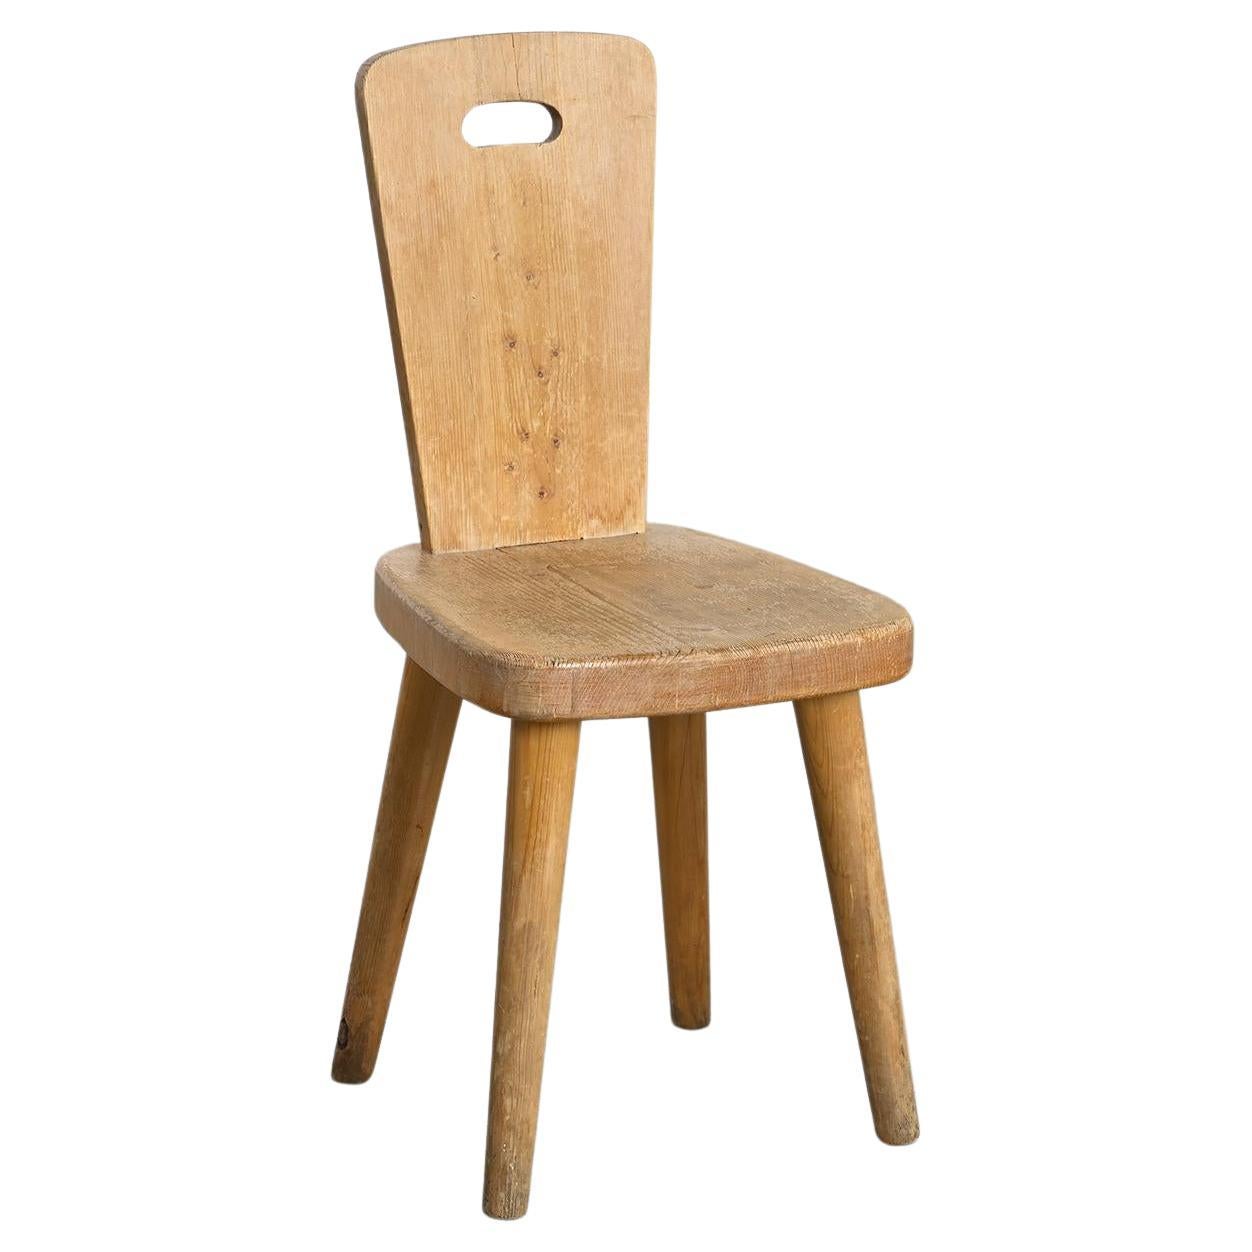 Solid Pine Chair by Christian Durupt, Meribel 1960 For Sale